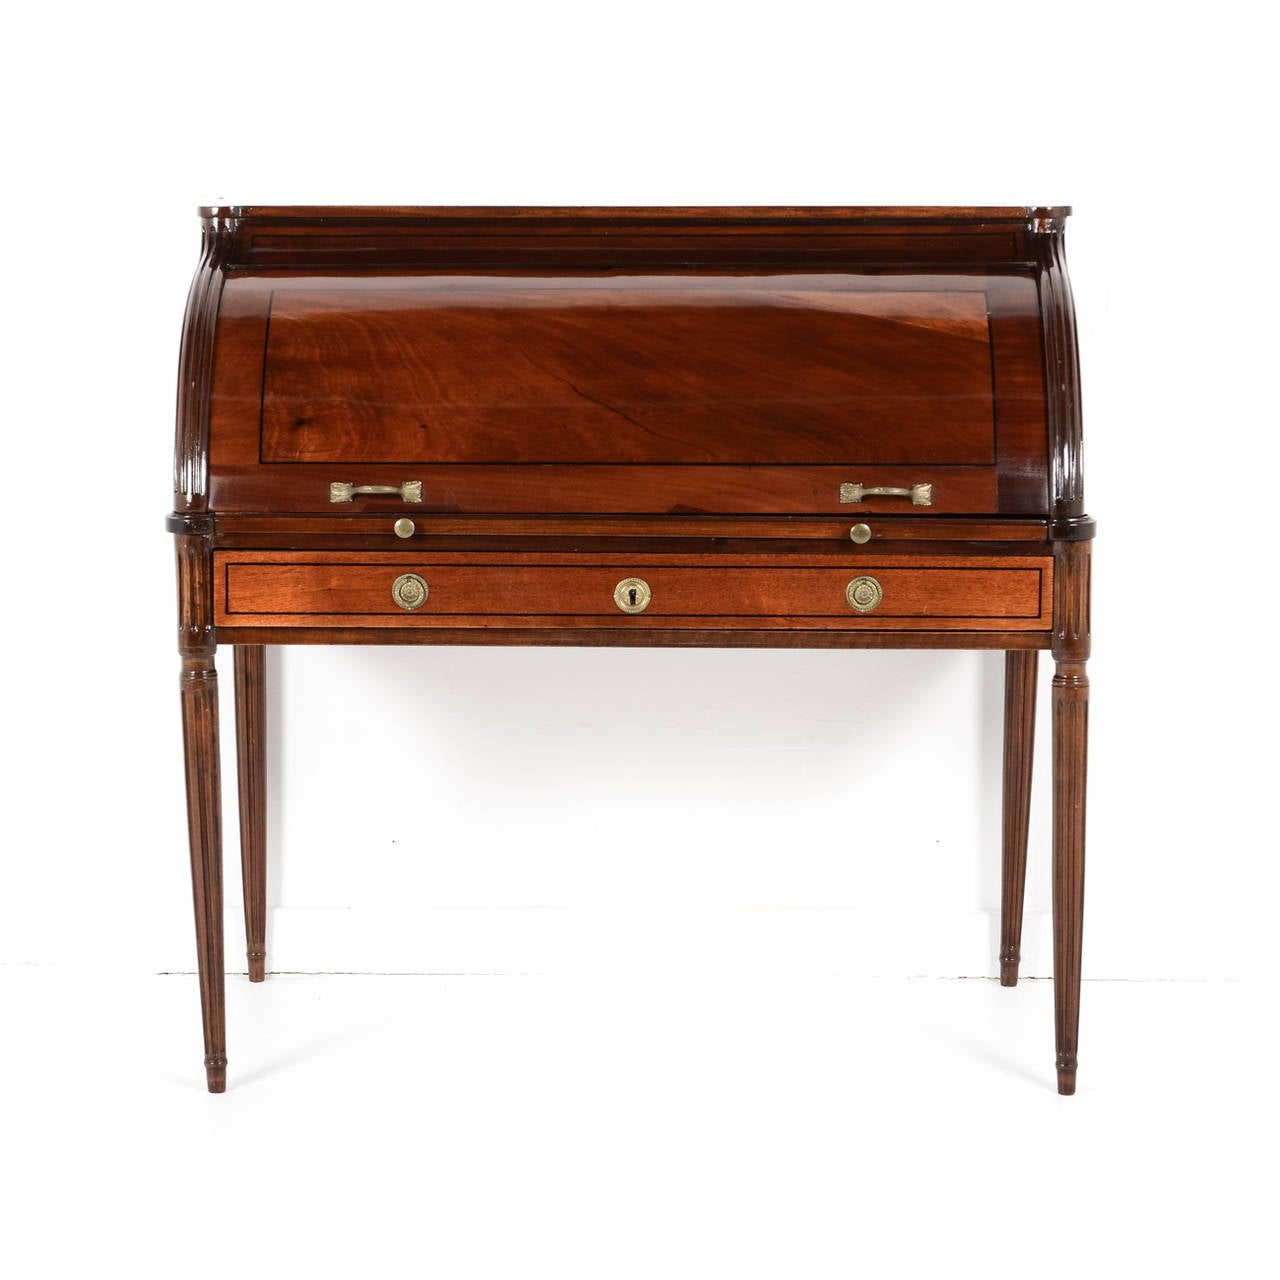 An elegant French antique cylinder desk from the 19th century. In superior original condition with ebonized pin stripe detail and beautifully cast bronze mounts and pulls. French polish.